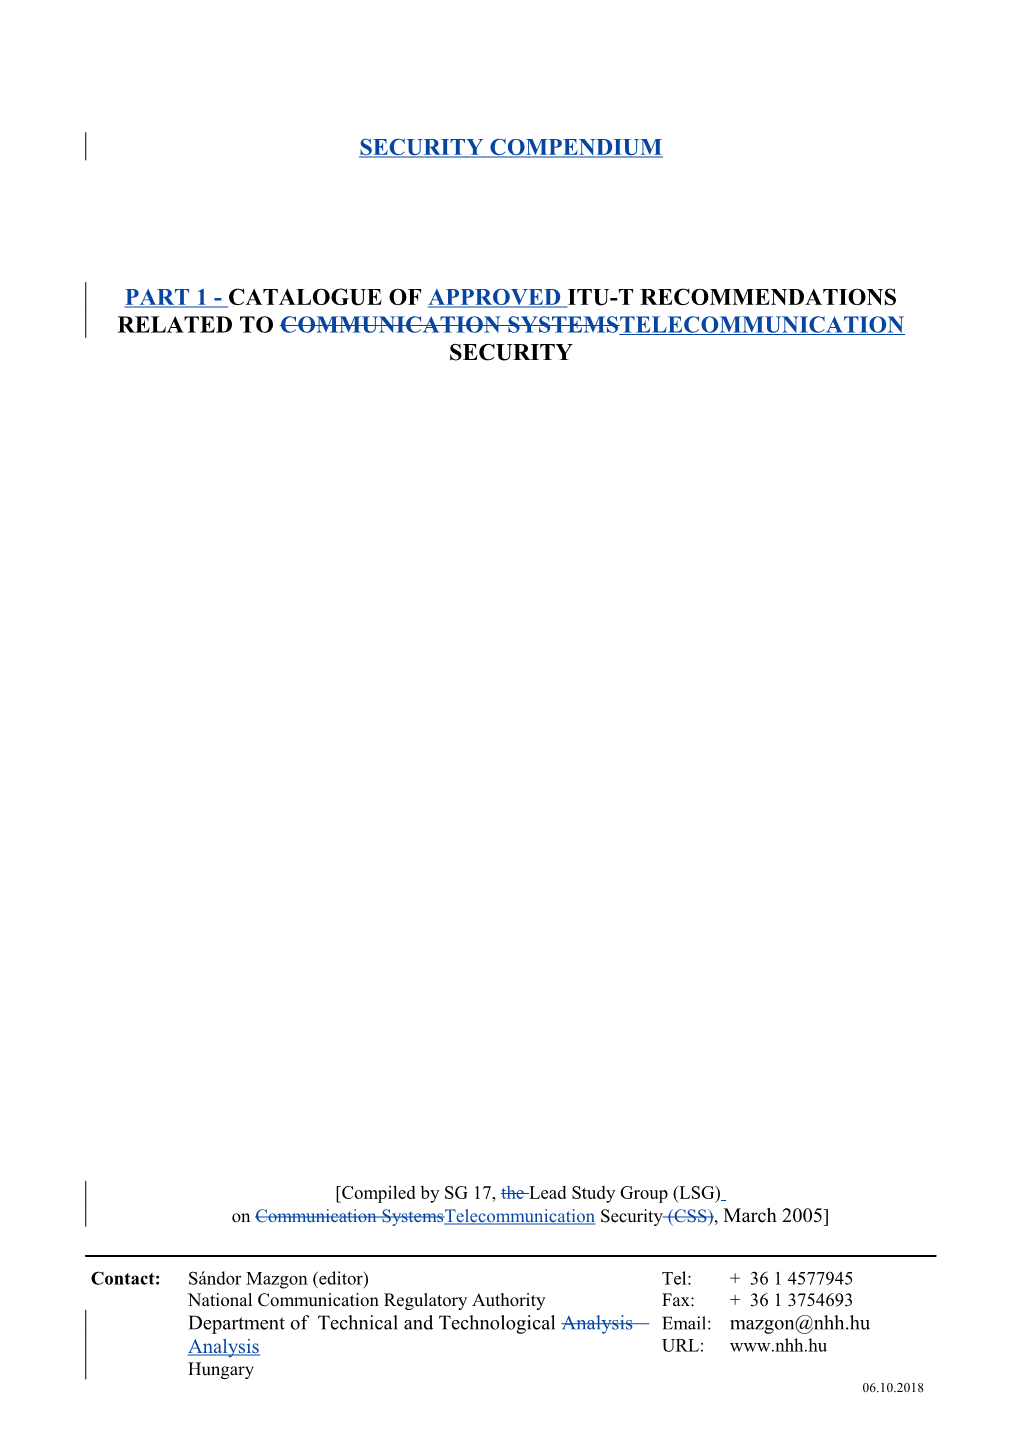 PART 1 - Catalogue of APPROVED ITU-T Recommendations Related to Communication Systems